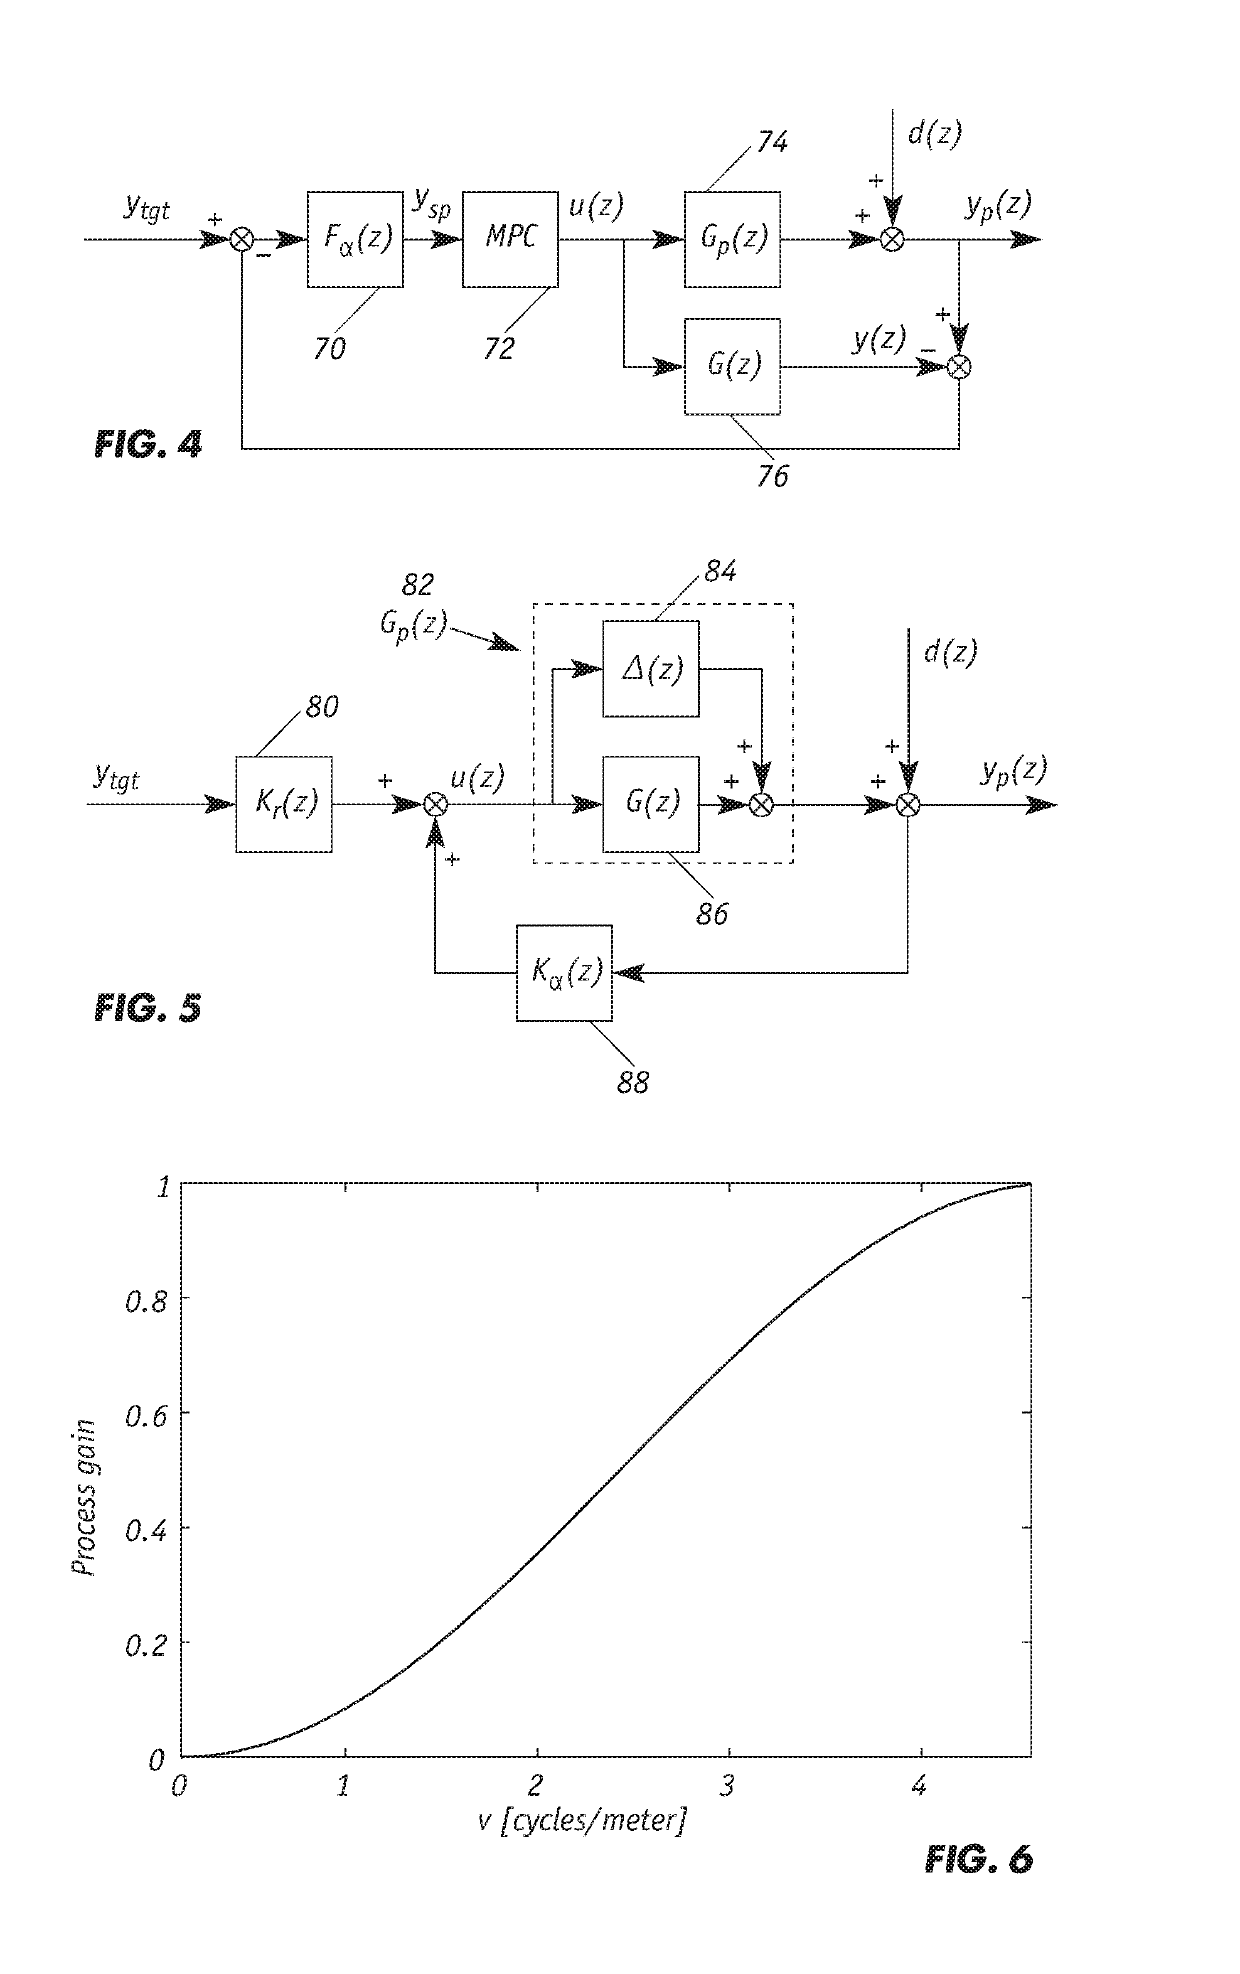 Method of designing model predictive control for cross directional flat sheet manufacturing processes to guarantee spatial robustness and to prevent actuator picketing